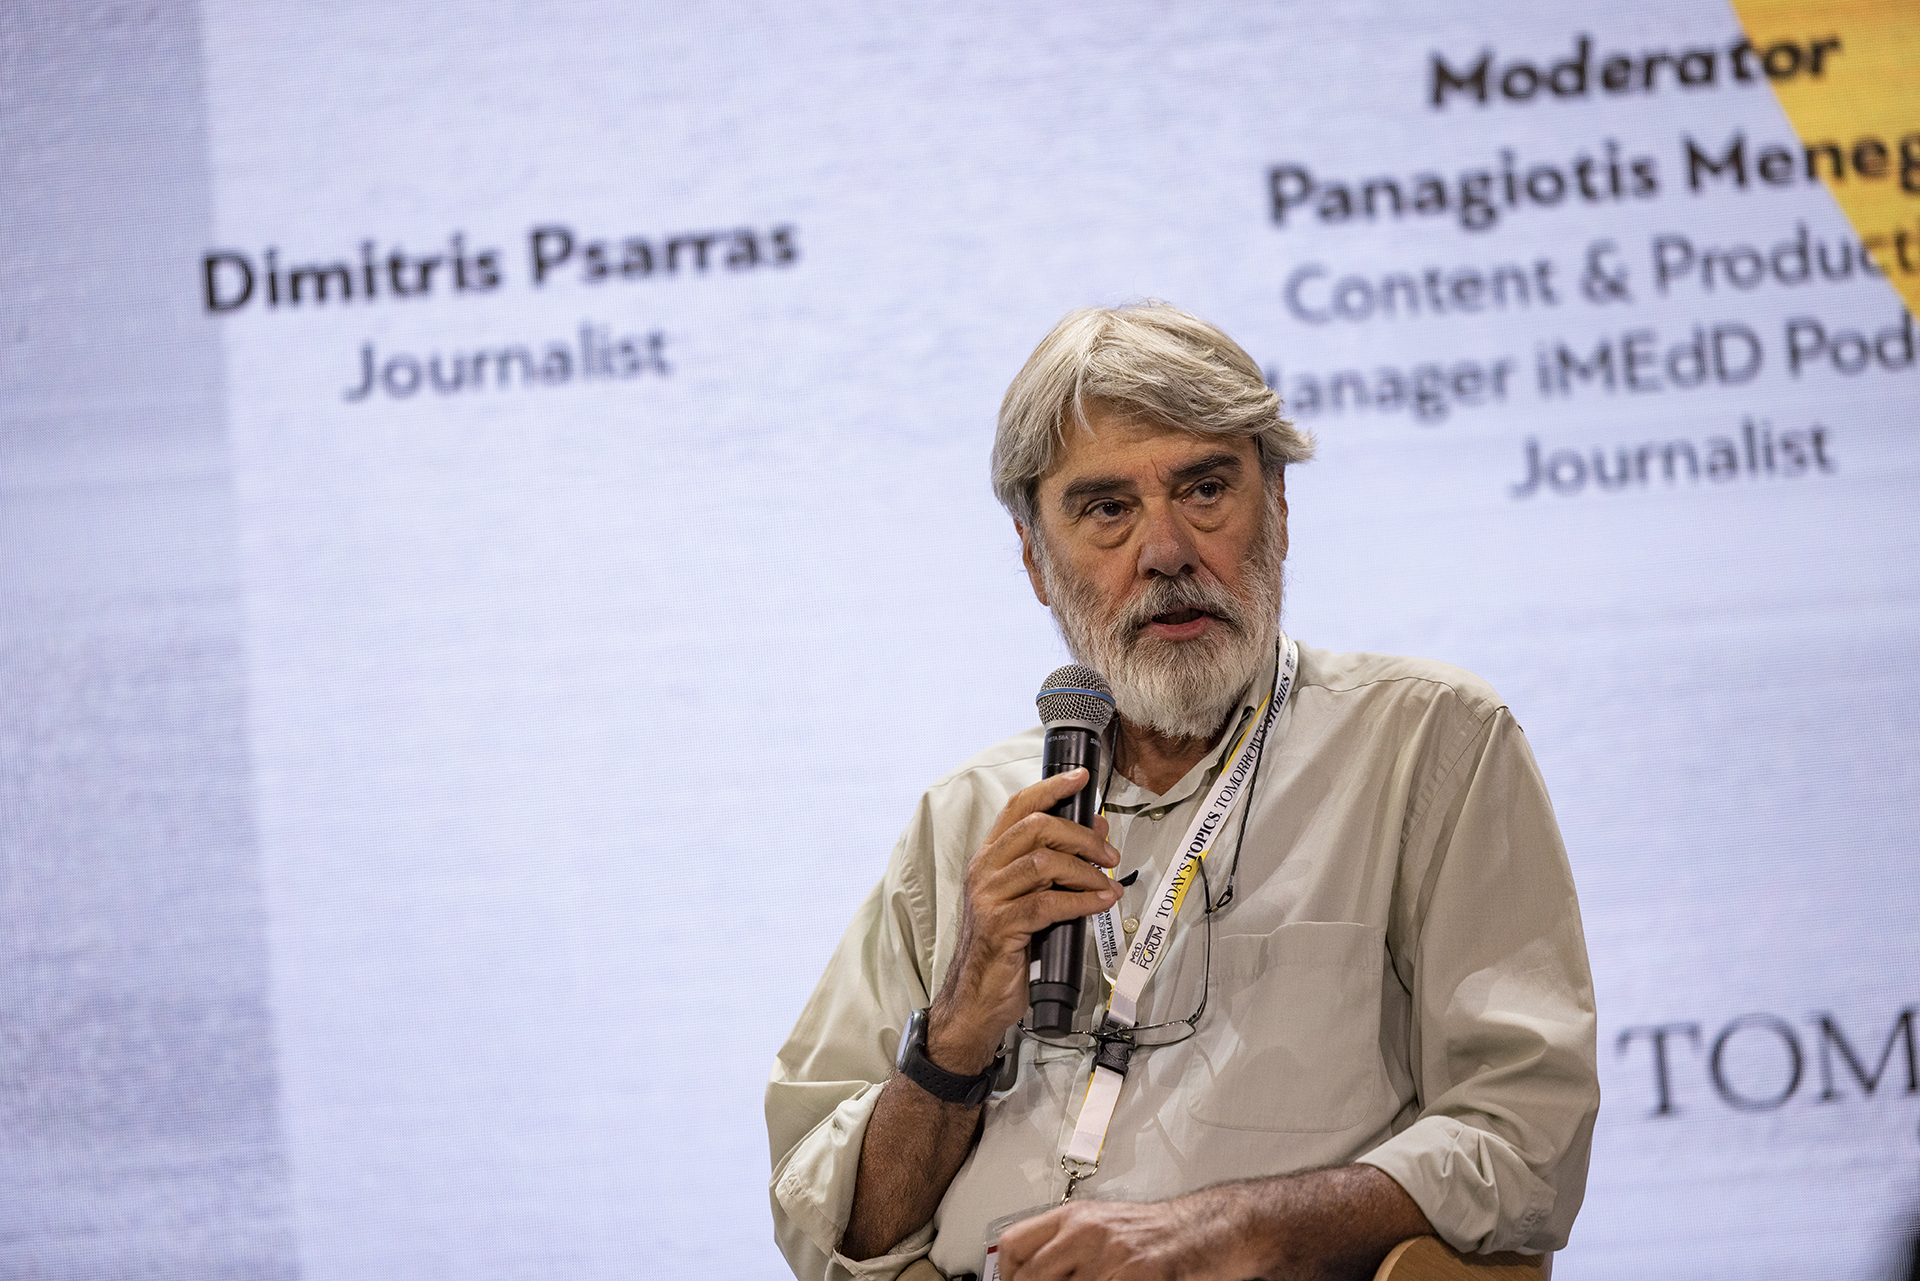 Dimitris Psarras, a journalist of the newspaper "Efimerida ton Syntakton", speaks holding a microphone, as part of the panel "We need to talk about the far right, but how?", held at the iMEdD International Journalism Forum in September 2023. 